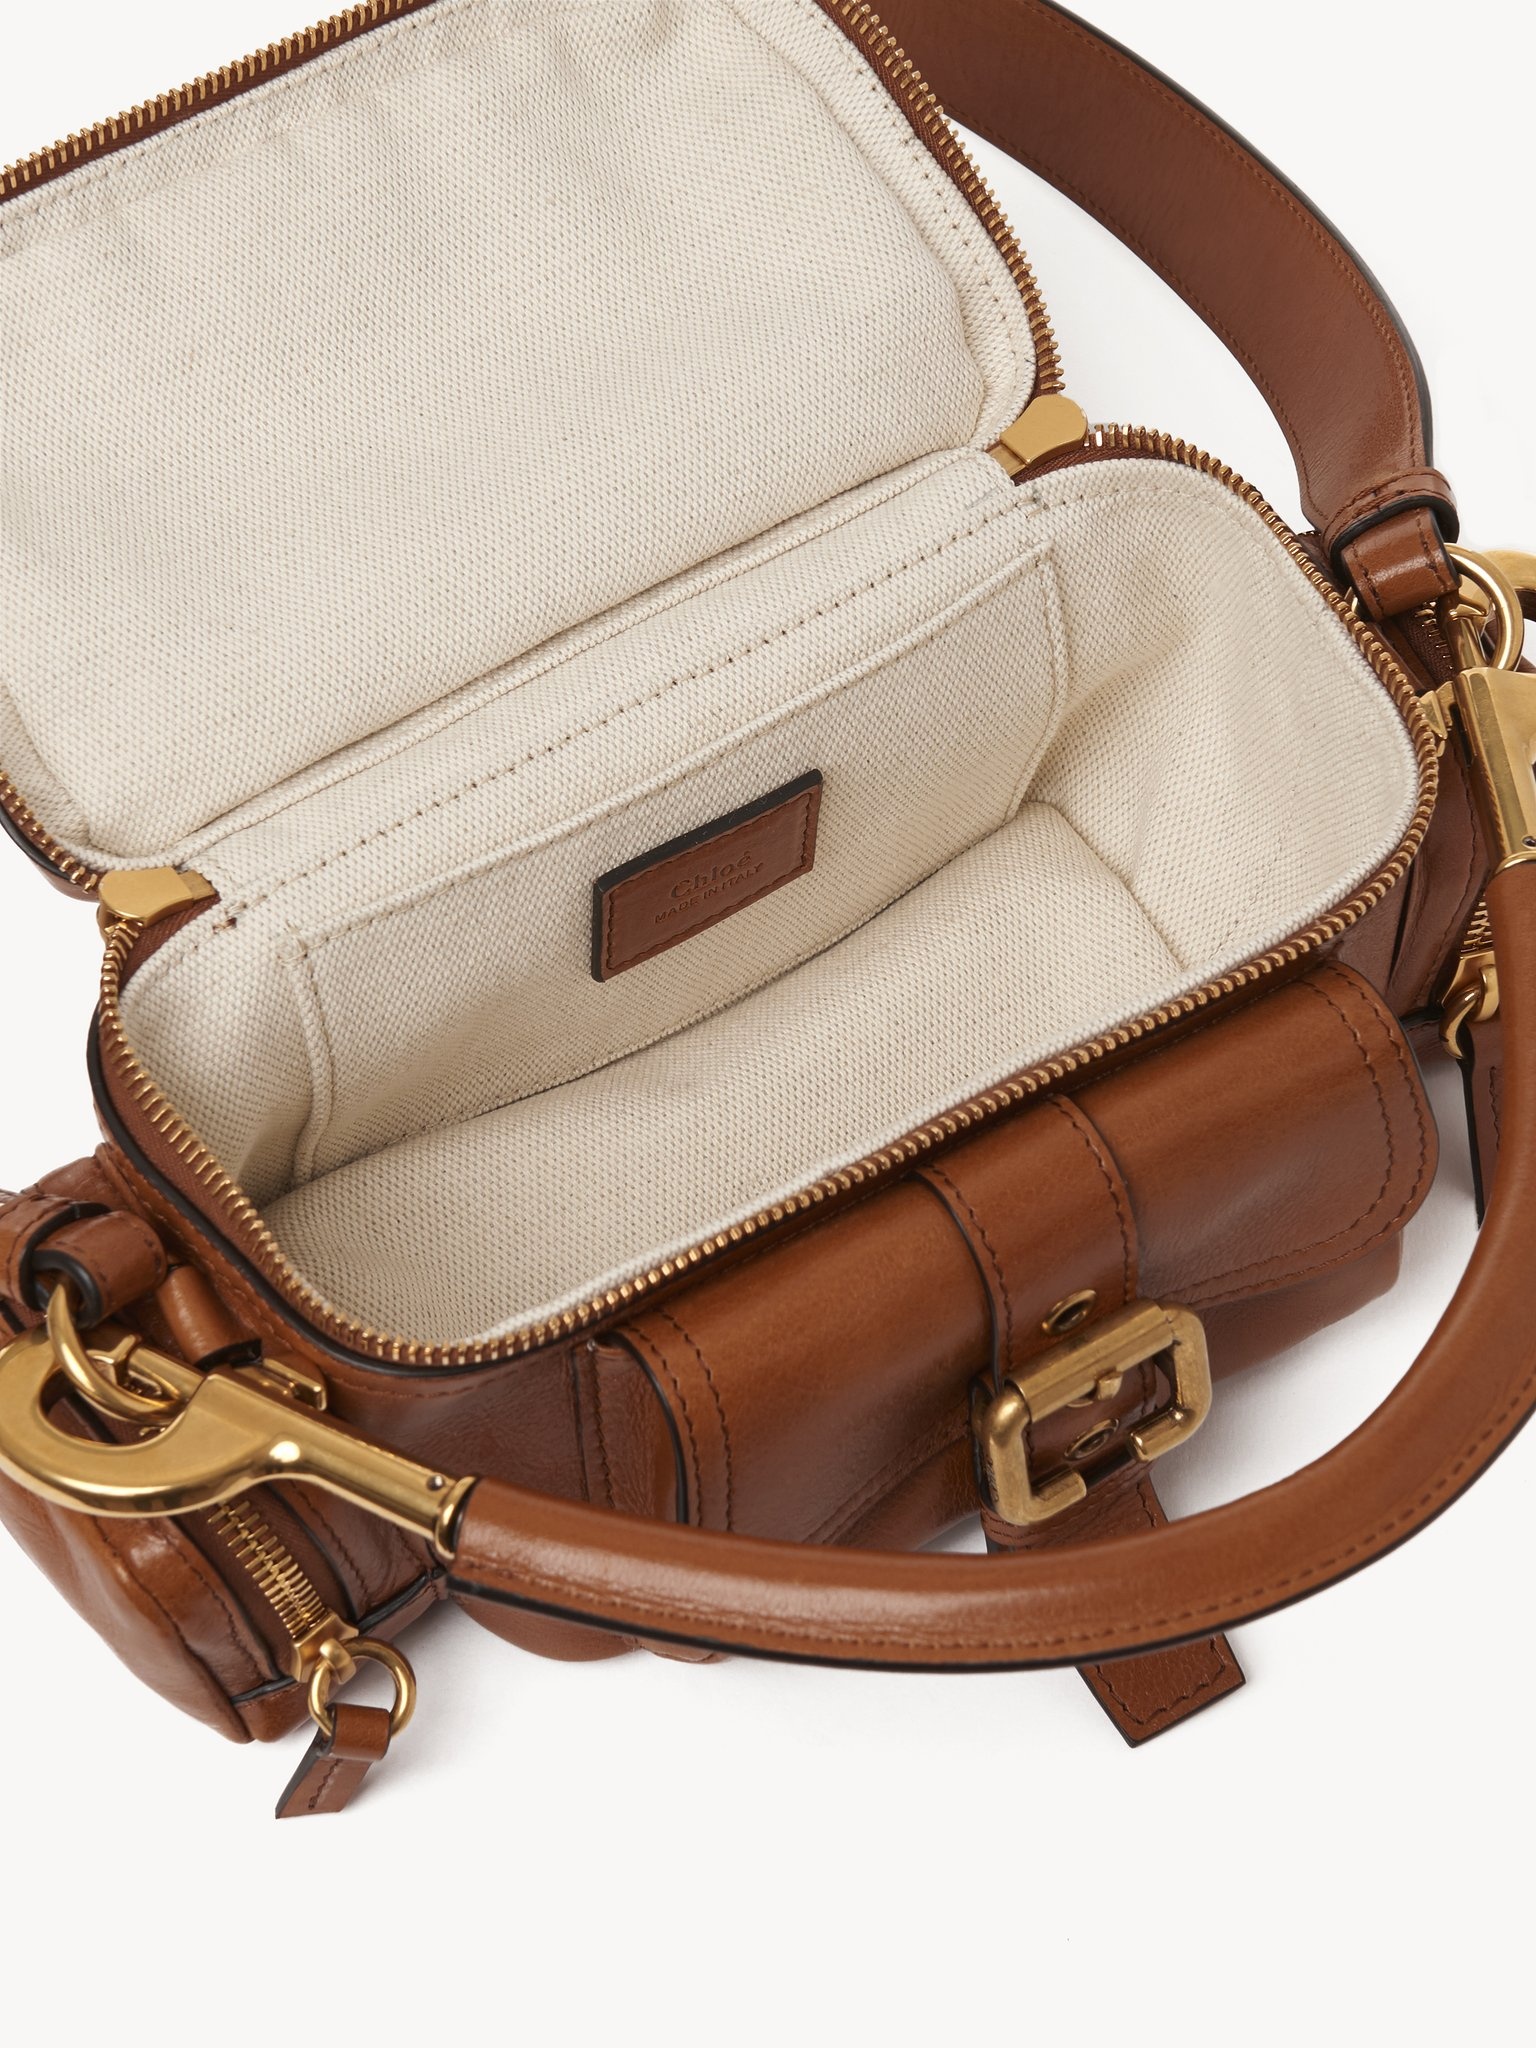 SMALL CAMERA BAG IN SOFT LEATHER - 5